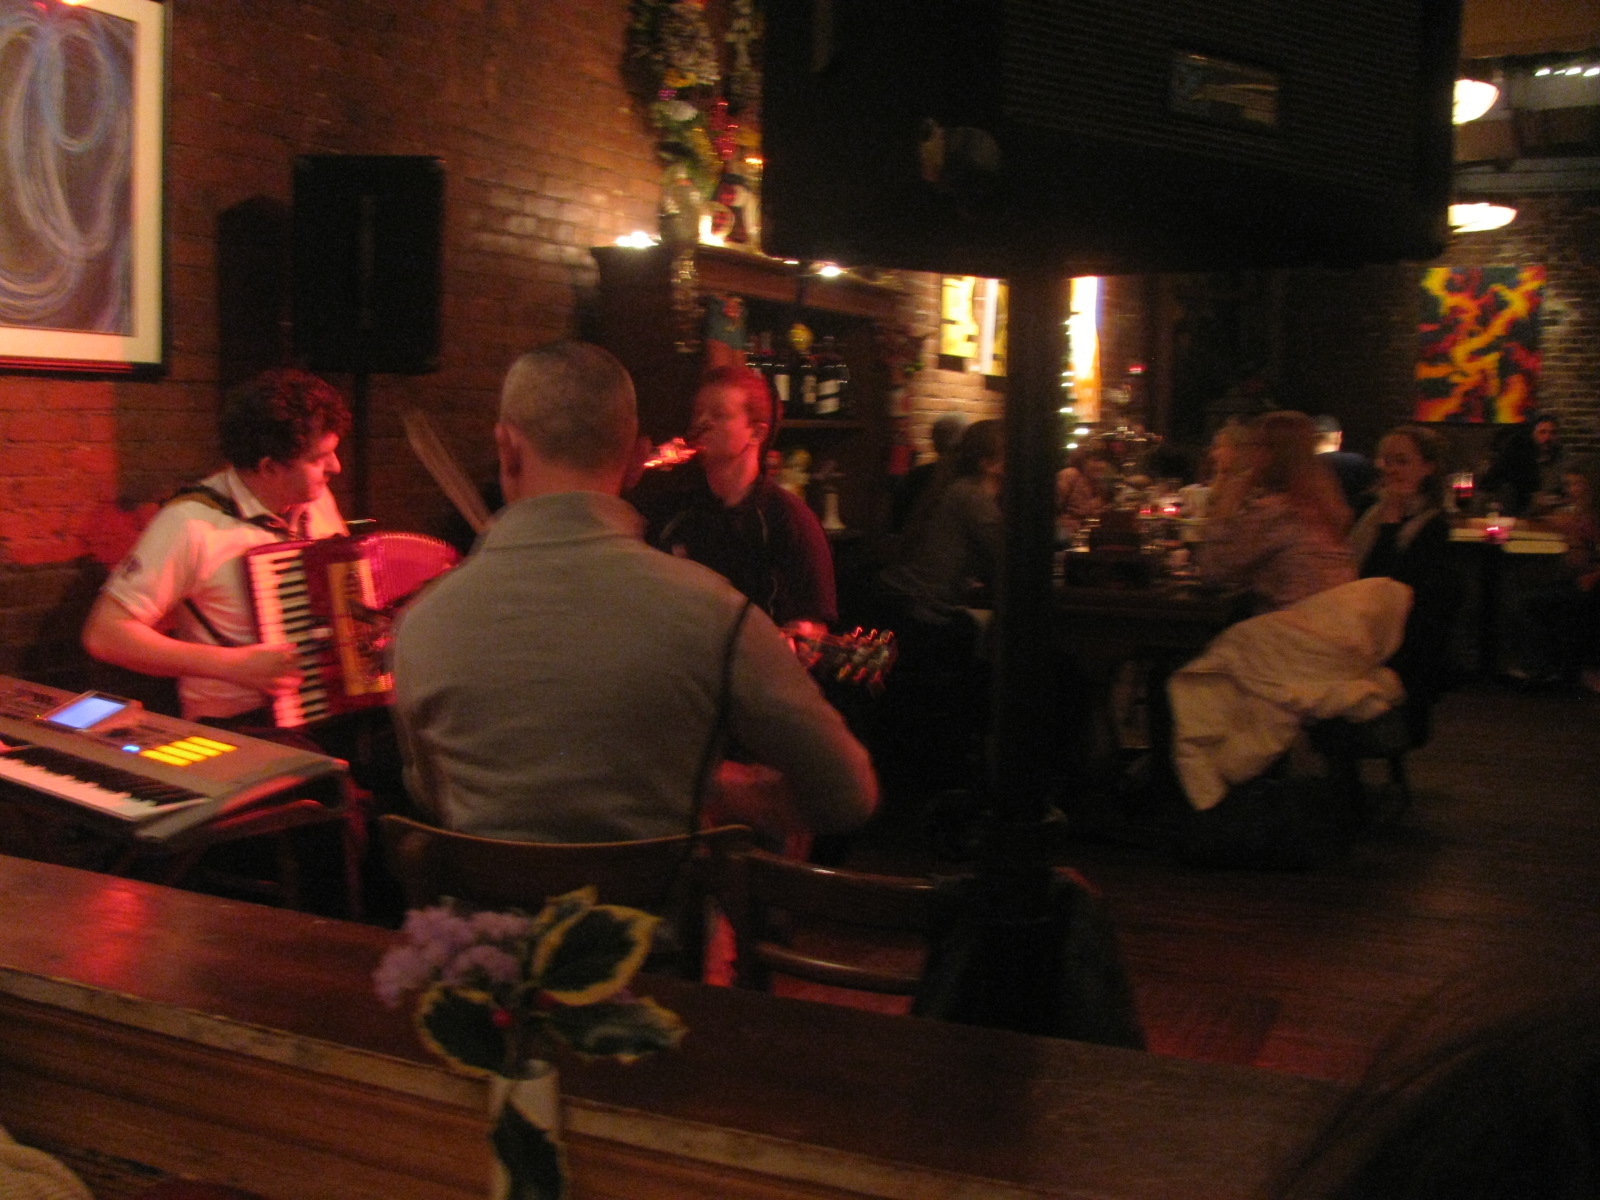 a group of people sitting around a table playing instruments